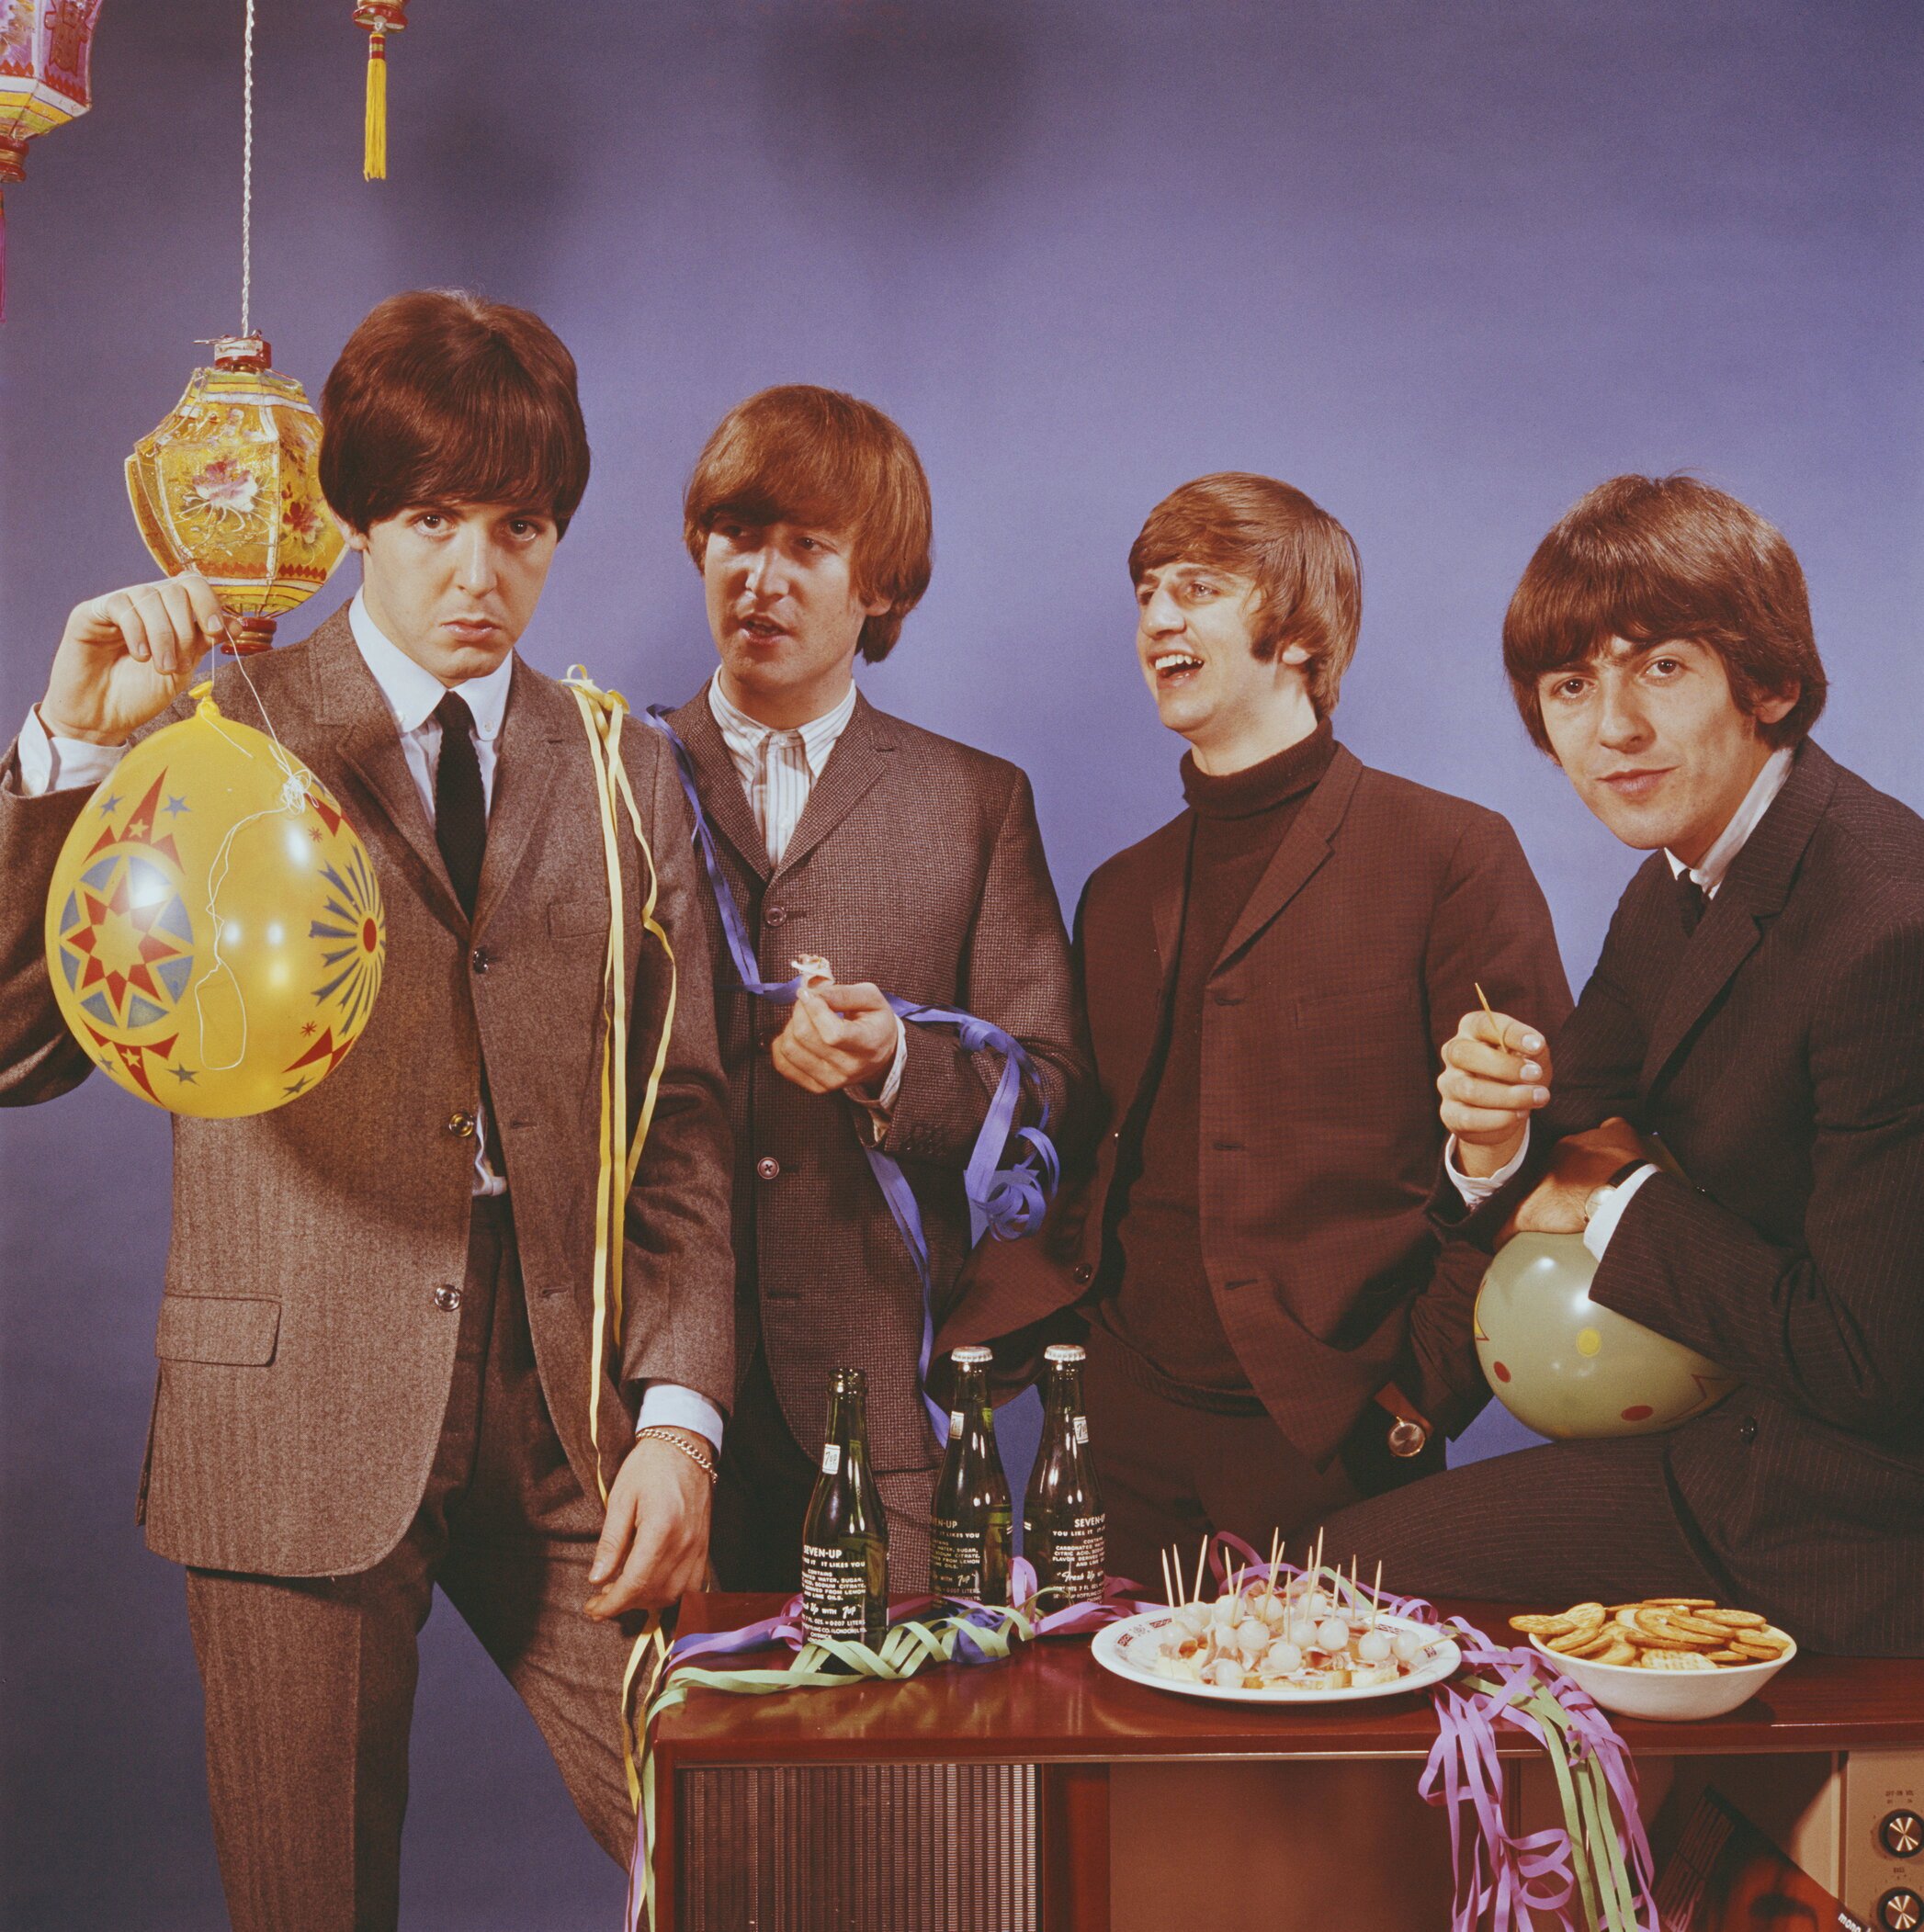 The Beatles pose with bottles of beer, party snacks, and balloons in October 1964. Left to right: Paul McCartney, John Lennon (1940-1980), Ringo Starr, and George Harrison (1943-2001). The session was taken to promote the BBC World Service.